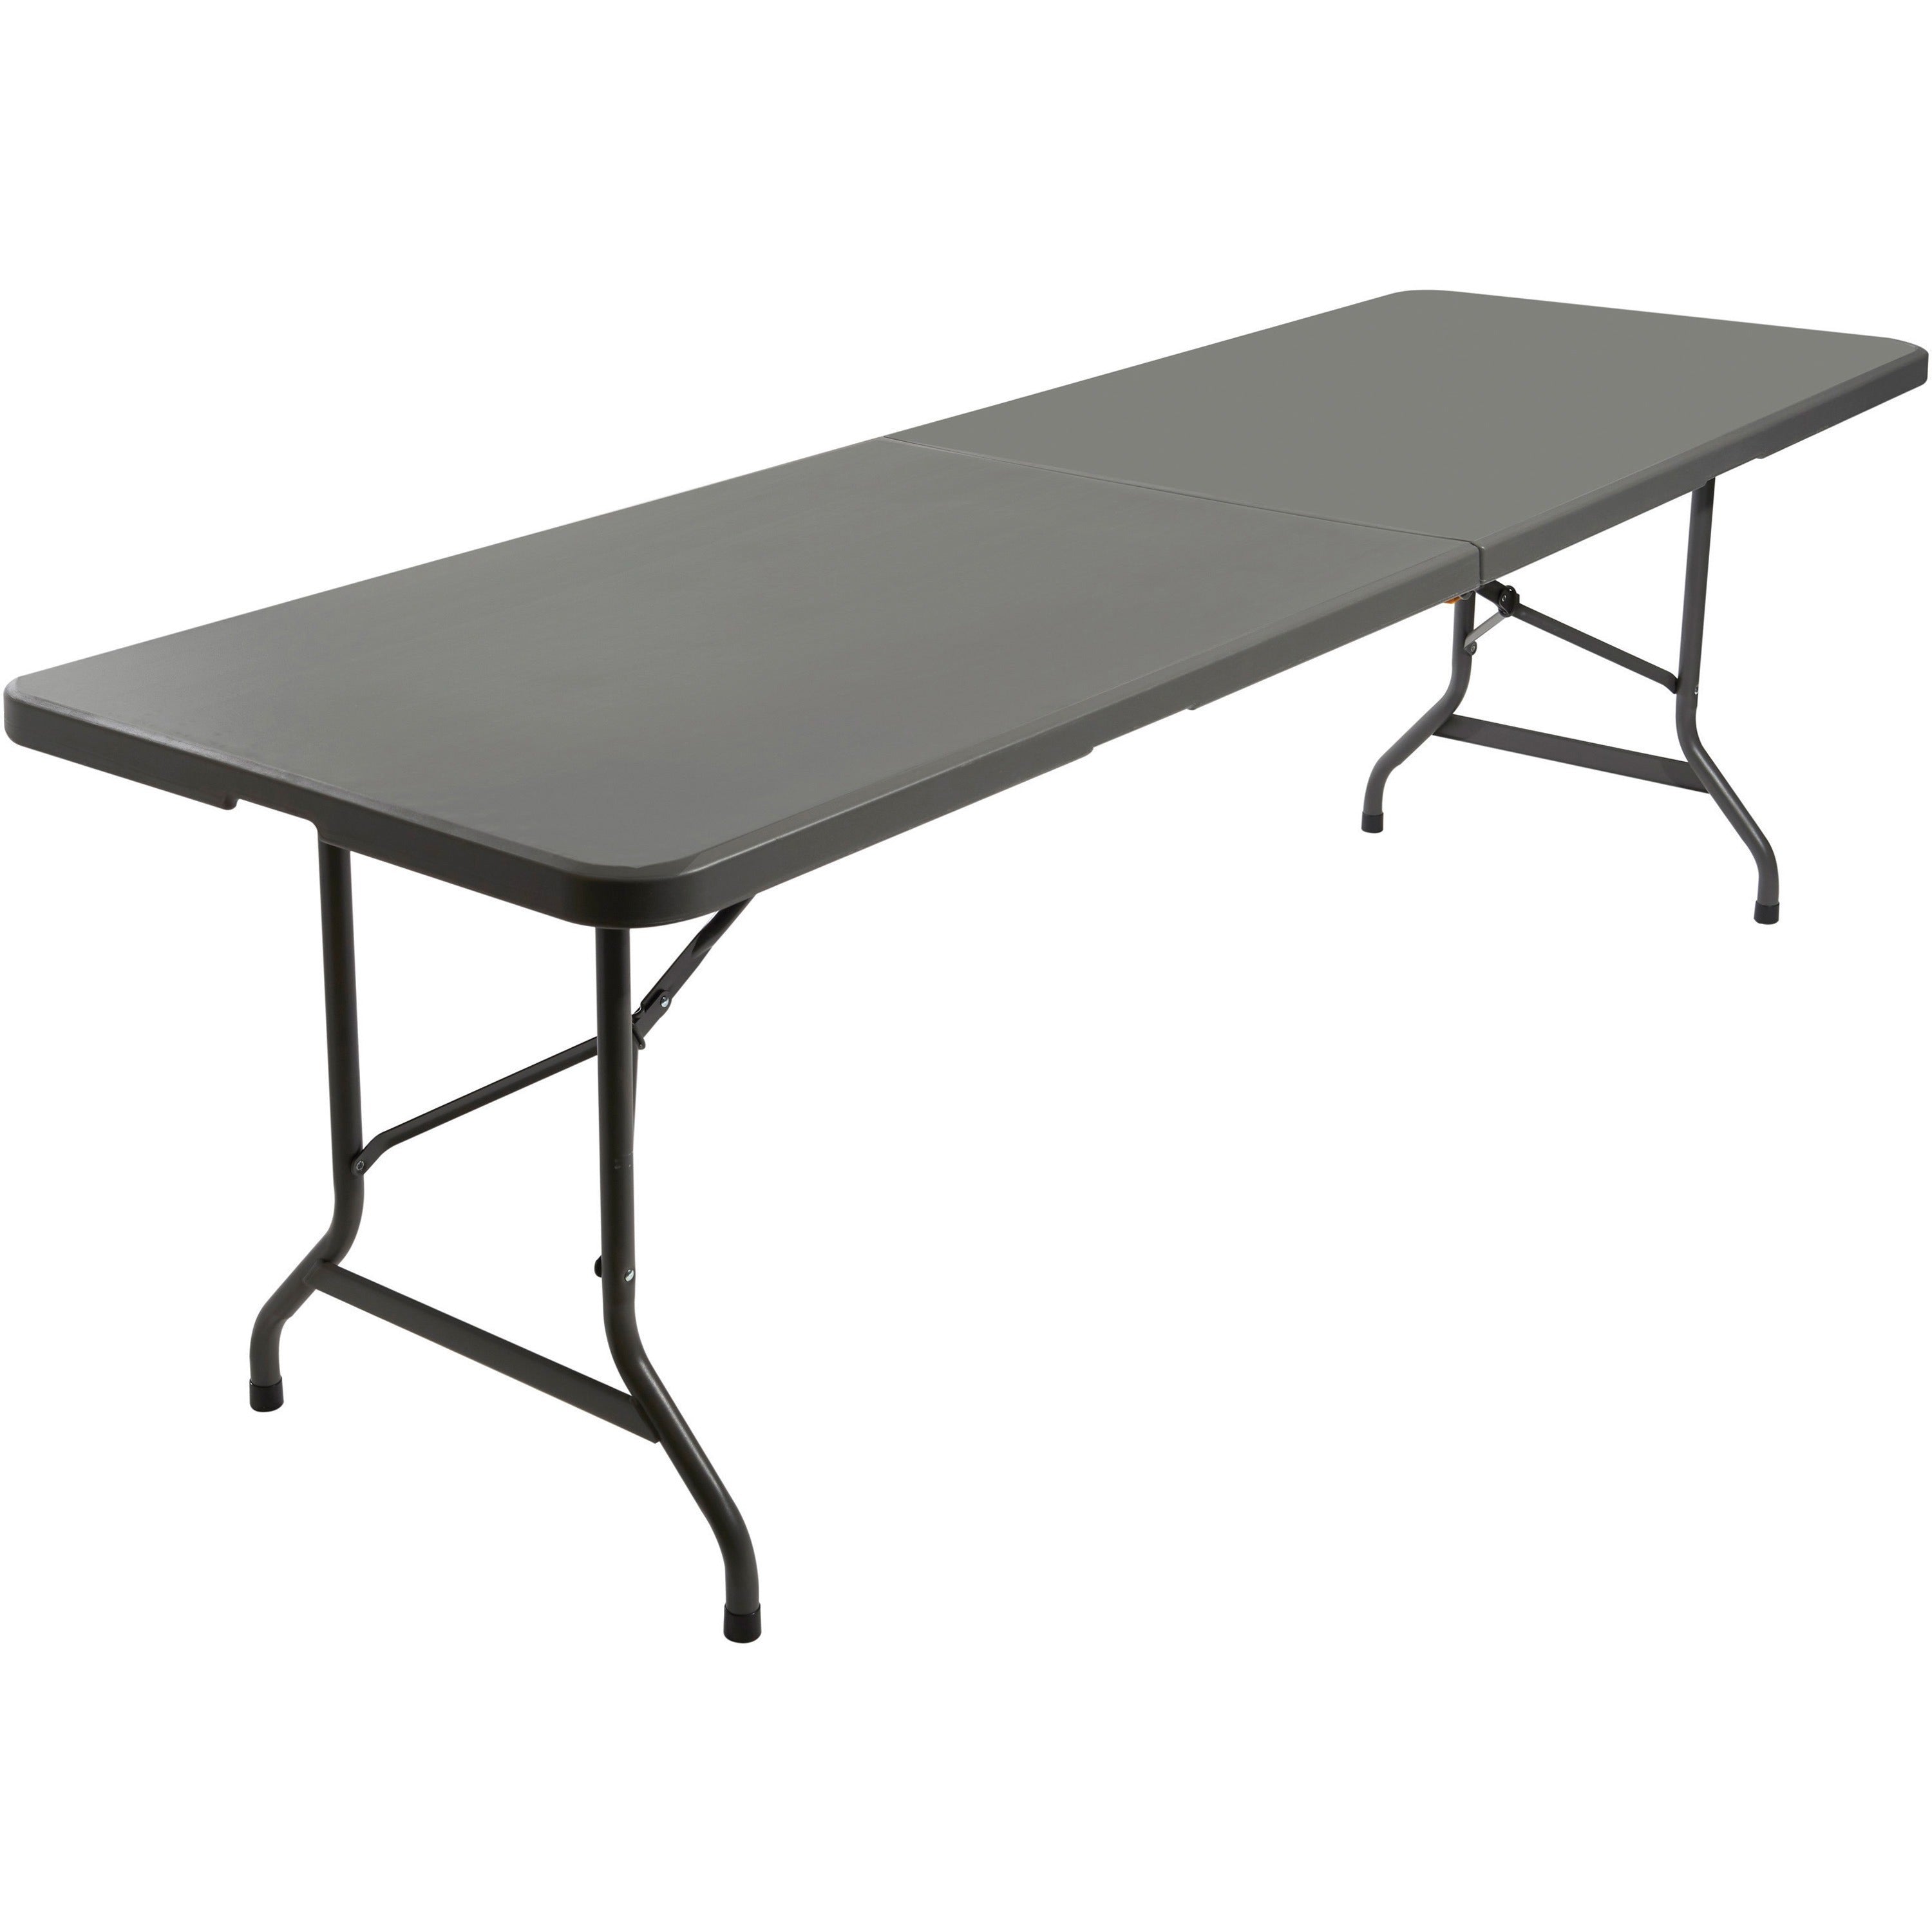 Iceberg IndestrucTable TOO Bifold Table - For - Table TopRectangle Top - Contemporary Style - Adjustable Height - 96" Table Top Length x 30" Table Top Width x 2" Table Top Thickness - 29" Height - Charcoal, Powder Coated - Tubular Steel - 1 Each